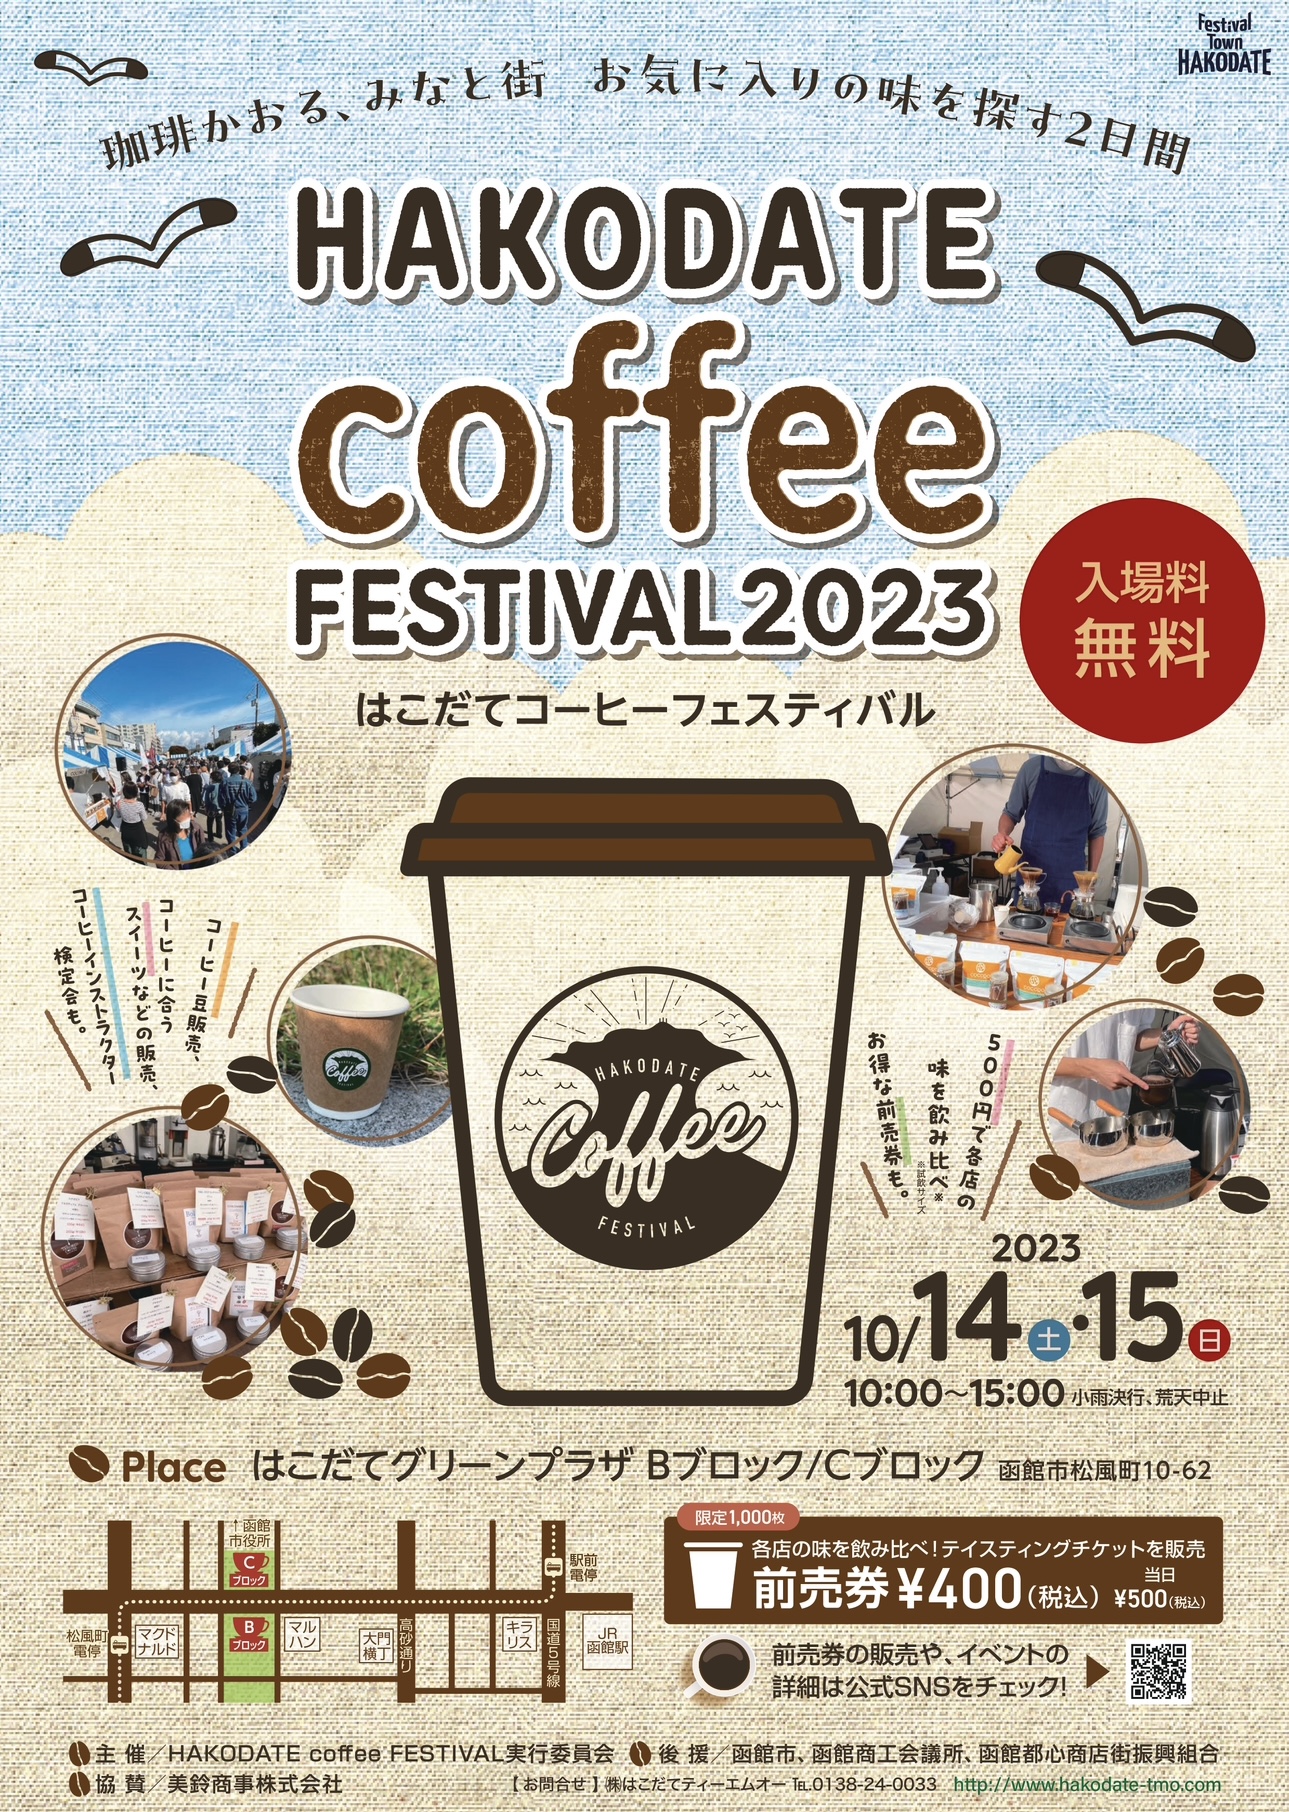 coffeeフェス参加決定！